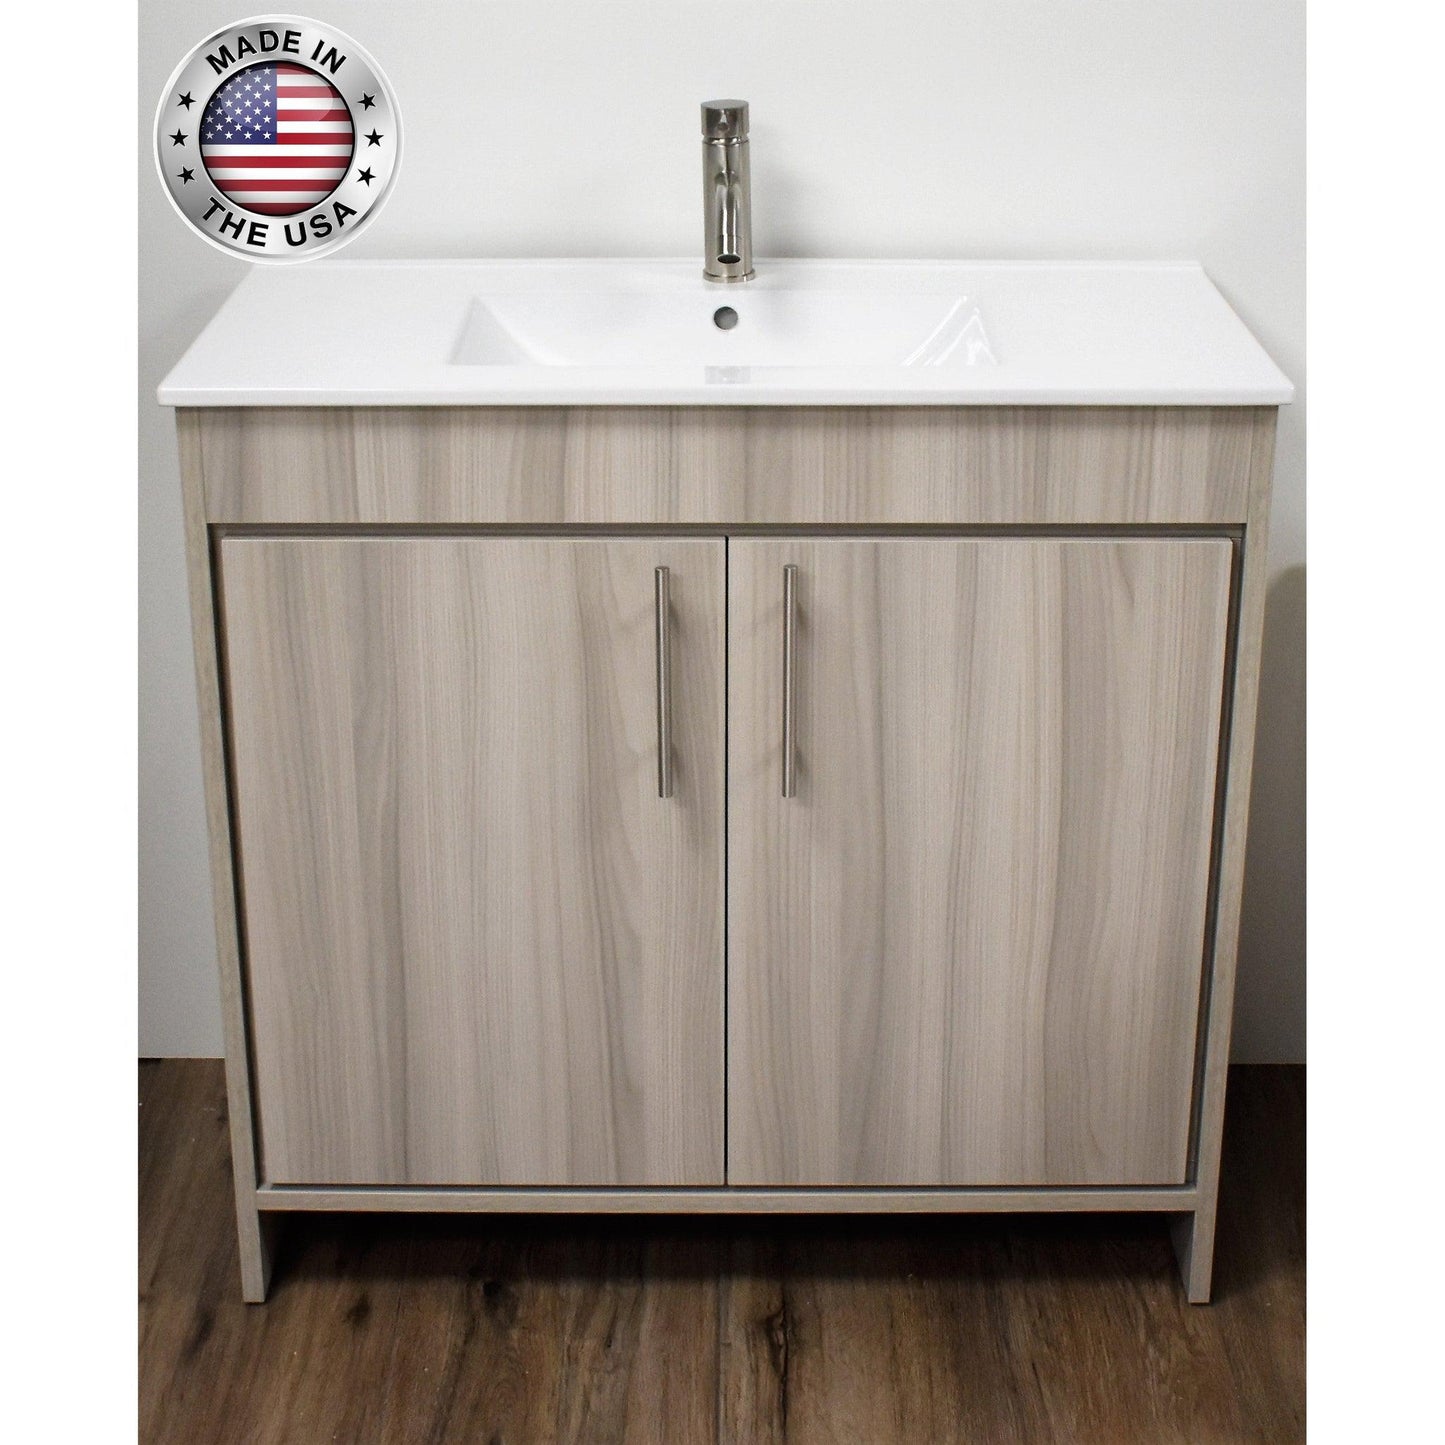 Volpa USA Villa 36" Ash Gray Freestanding Modern Bathroom Vanity With Integrated Ceramic Top and Brushed Nickel Round Handles